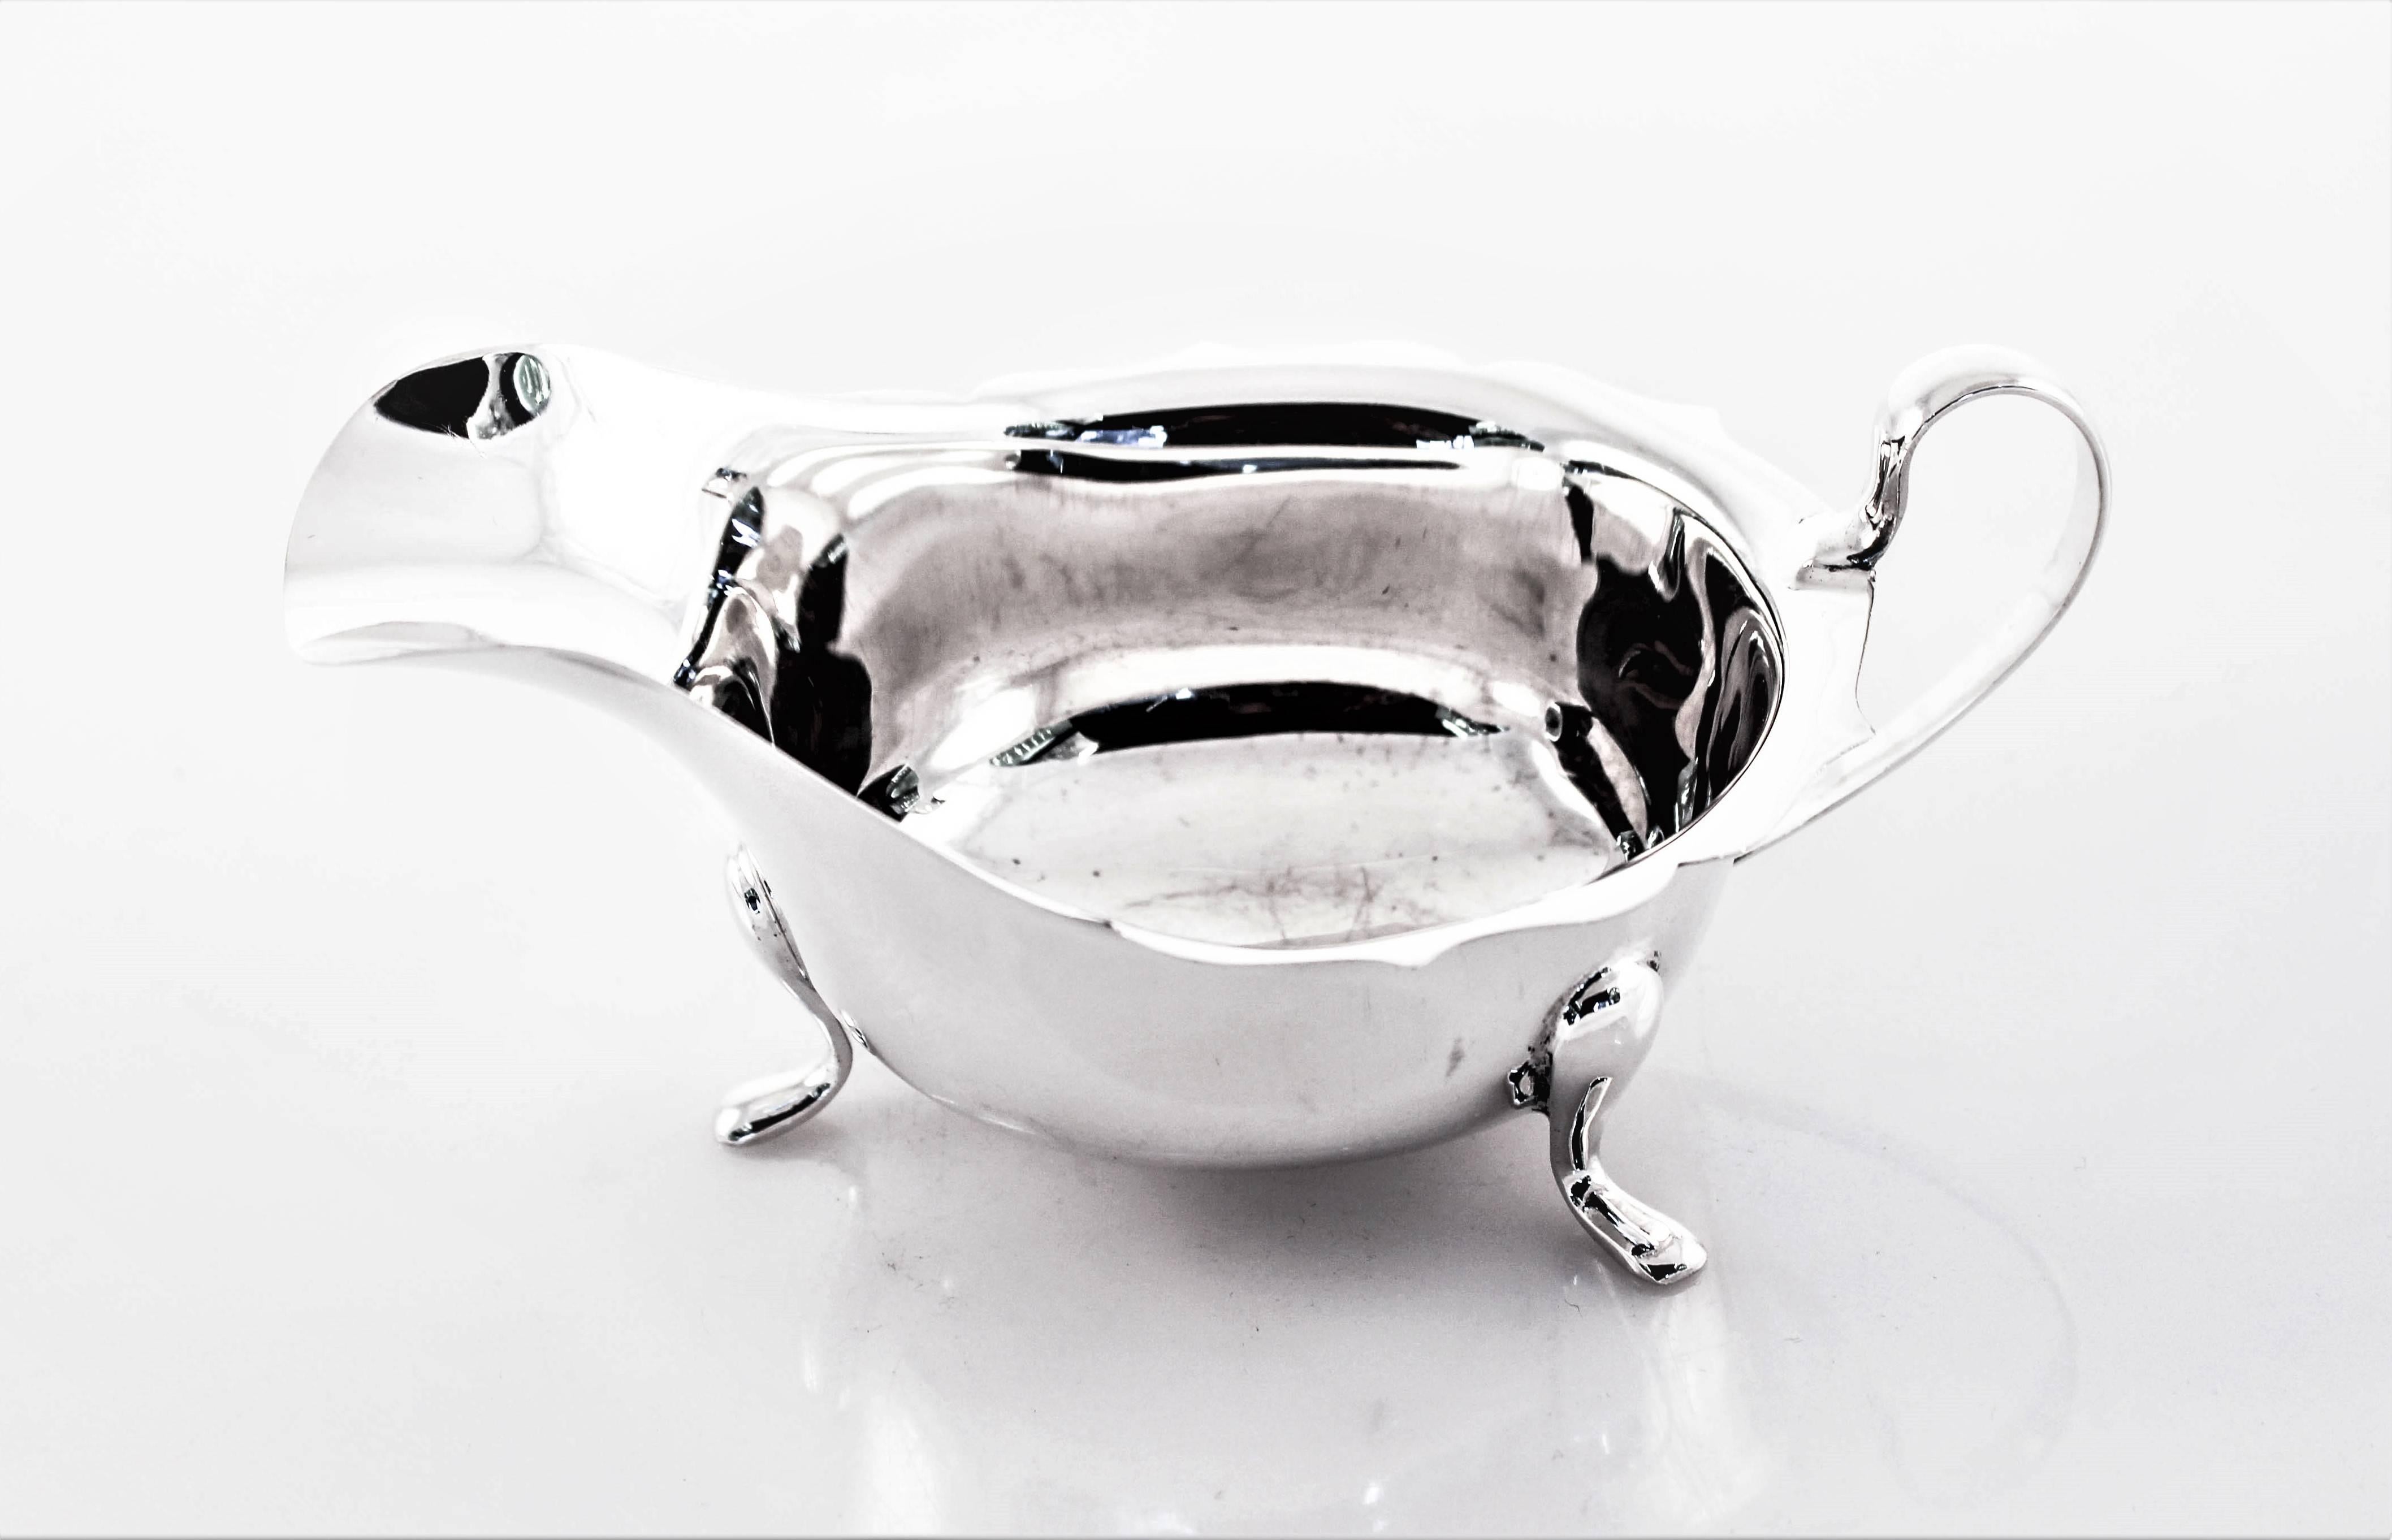 Gravy is messy, but serving it doesn’t need to be. This English gravy boat comes with an under-tray that makes passing it not only easy but neat. No more drips on your lovely tablecloth, everything is caught on the tray. In traditional English